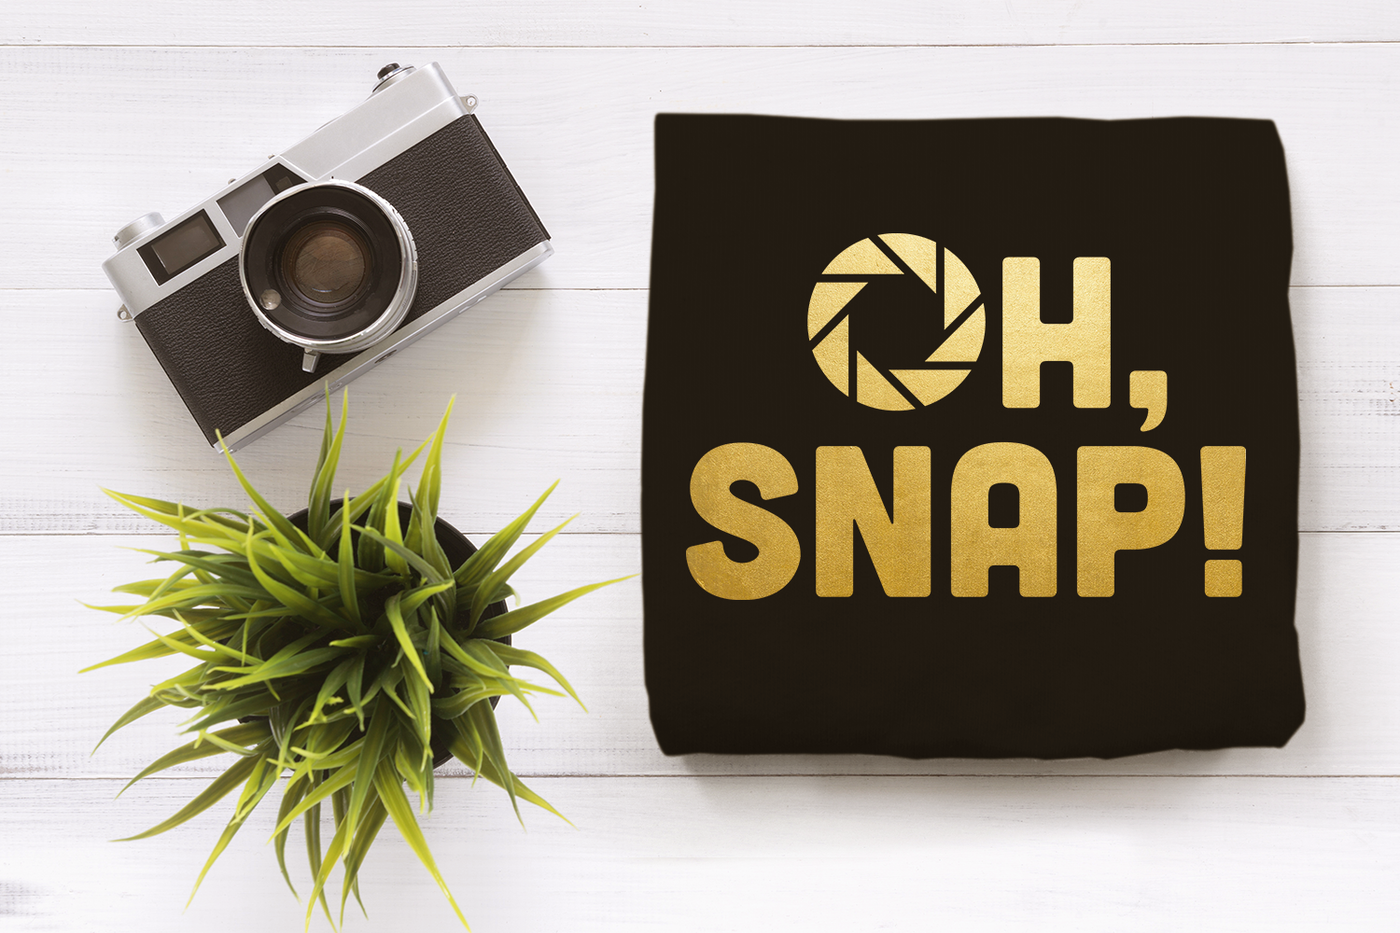 "Oh Snap!" SVG design with an aperture in place of the O. Shown in gold on a black shirt. The shirt lays on a white wood surface with a camera and plant nearby.